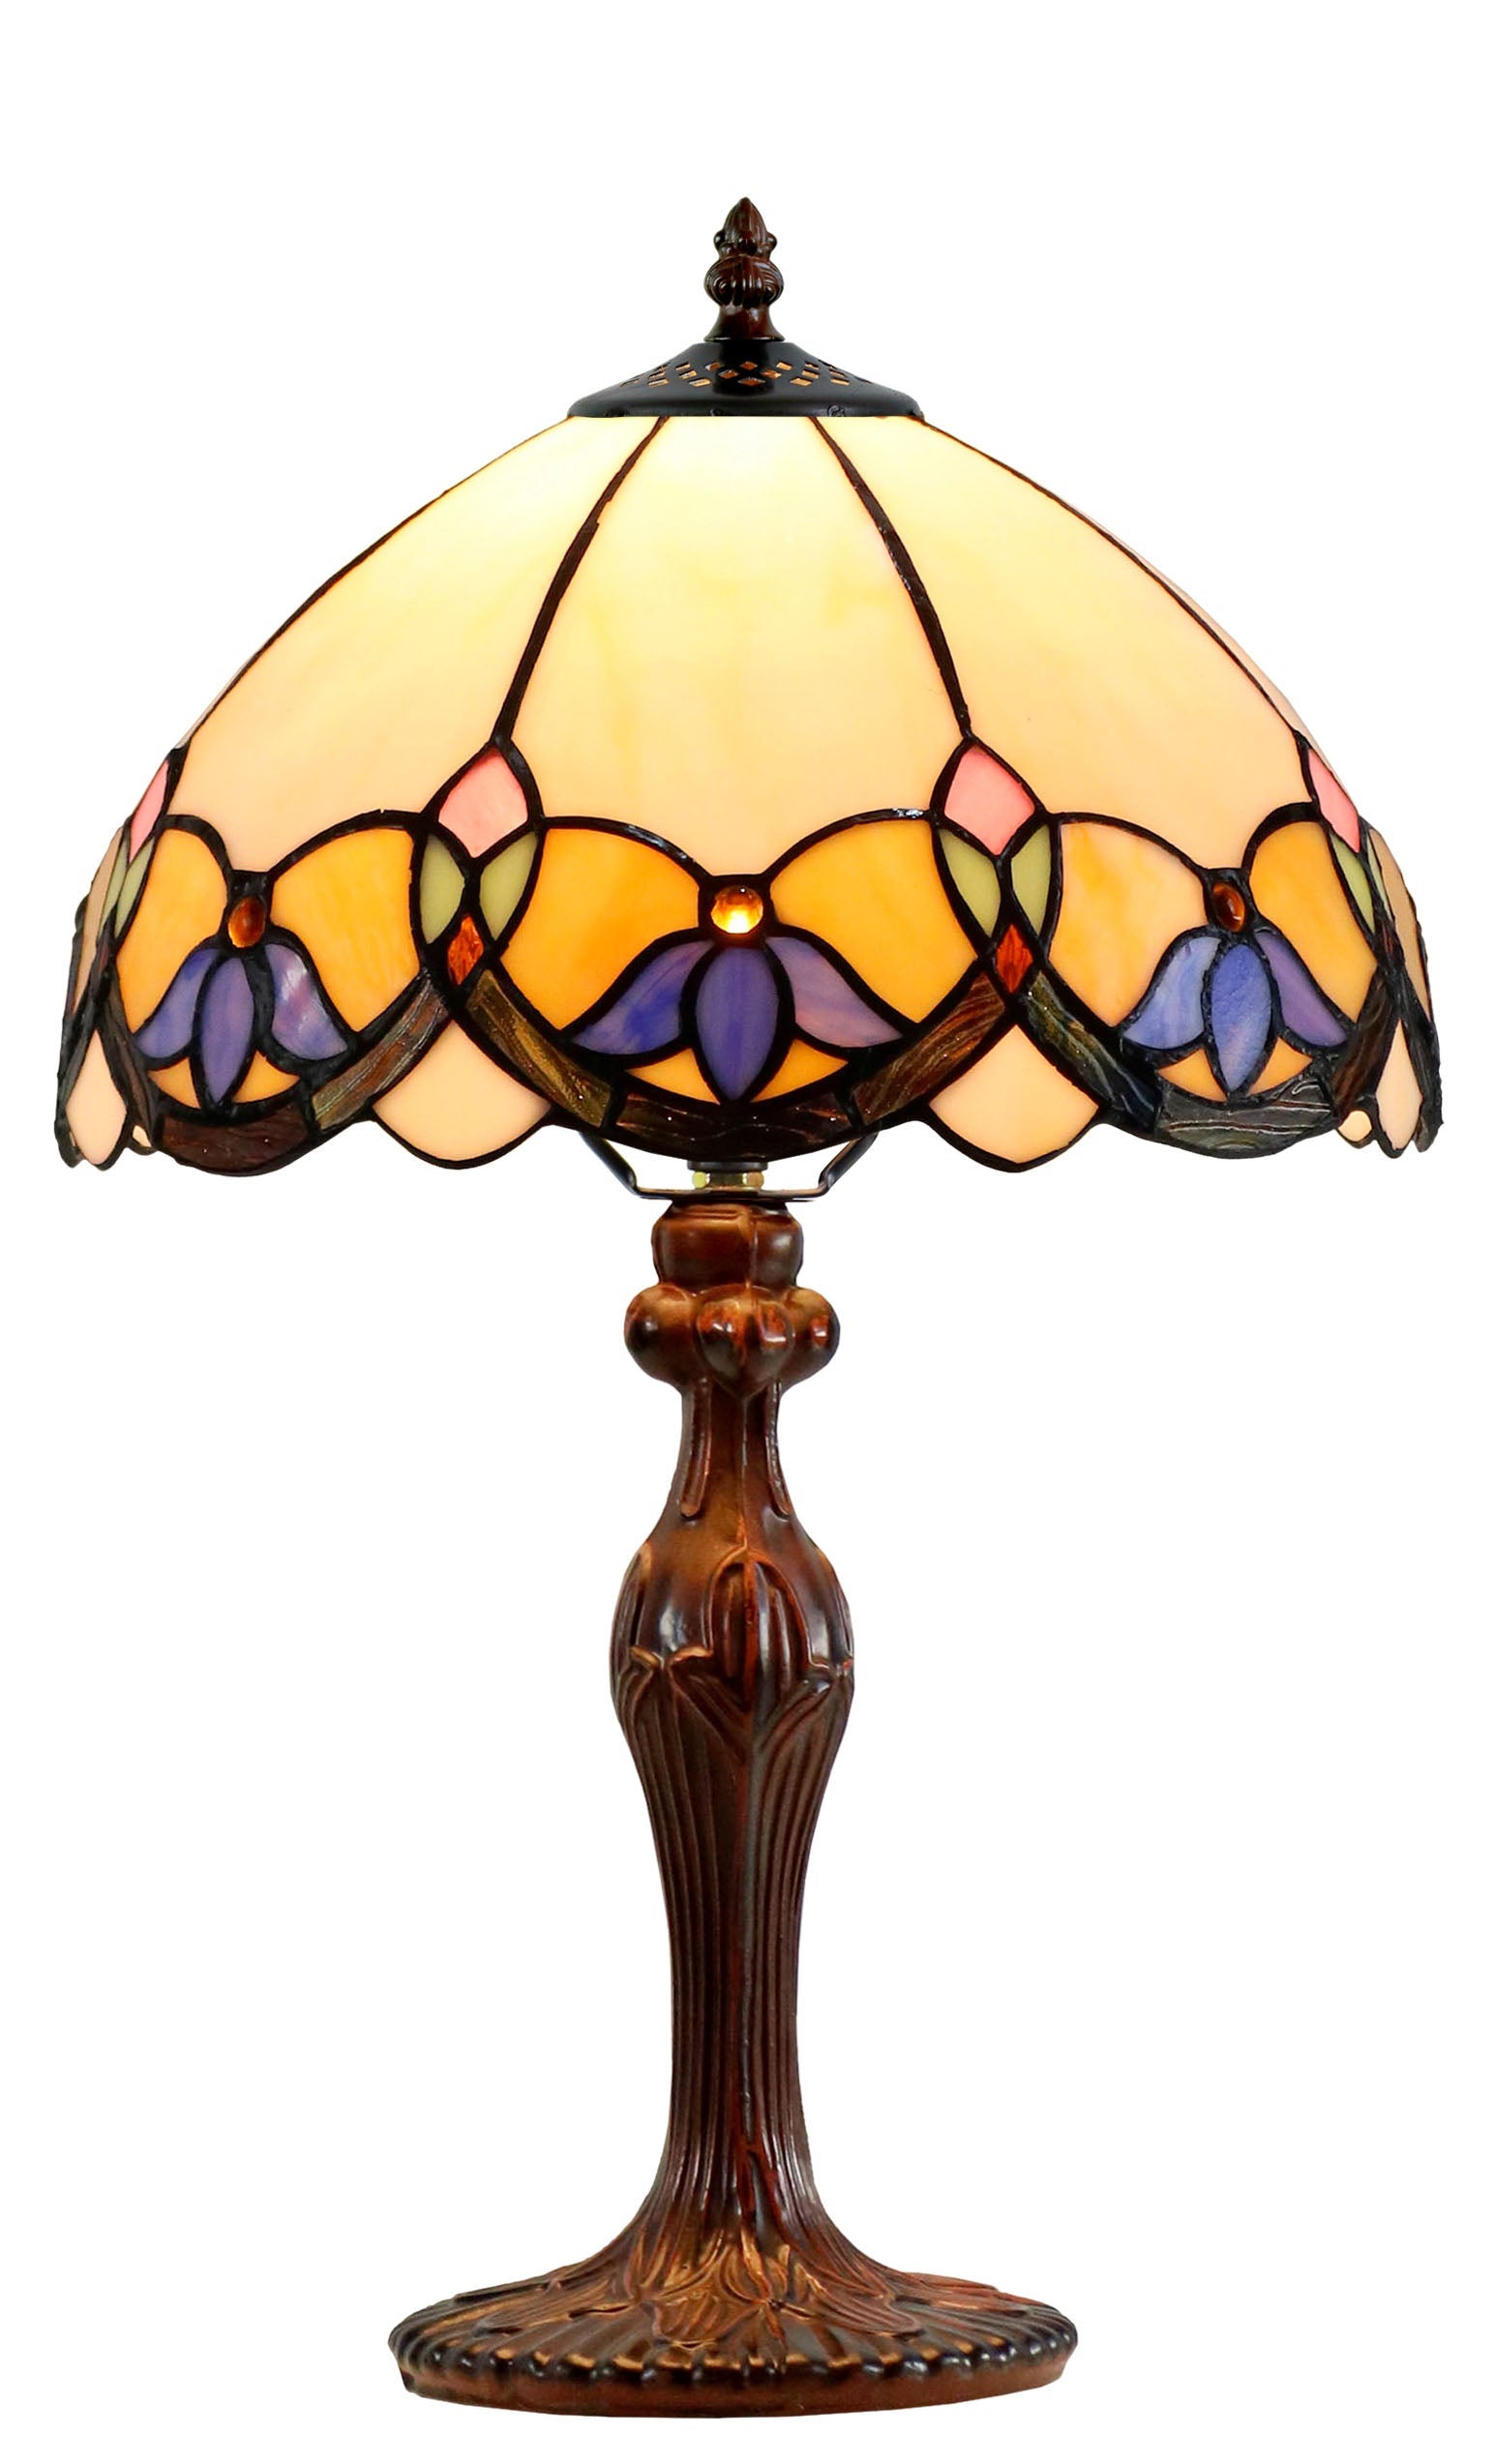 12 Wisteria Style Leadlight Stained Glass Tiffany Bedside Lamp